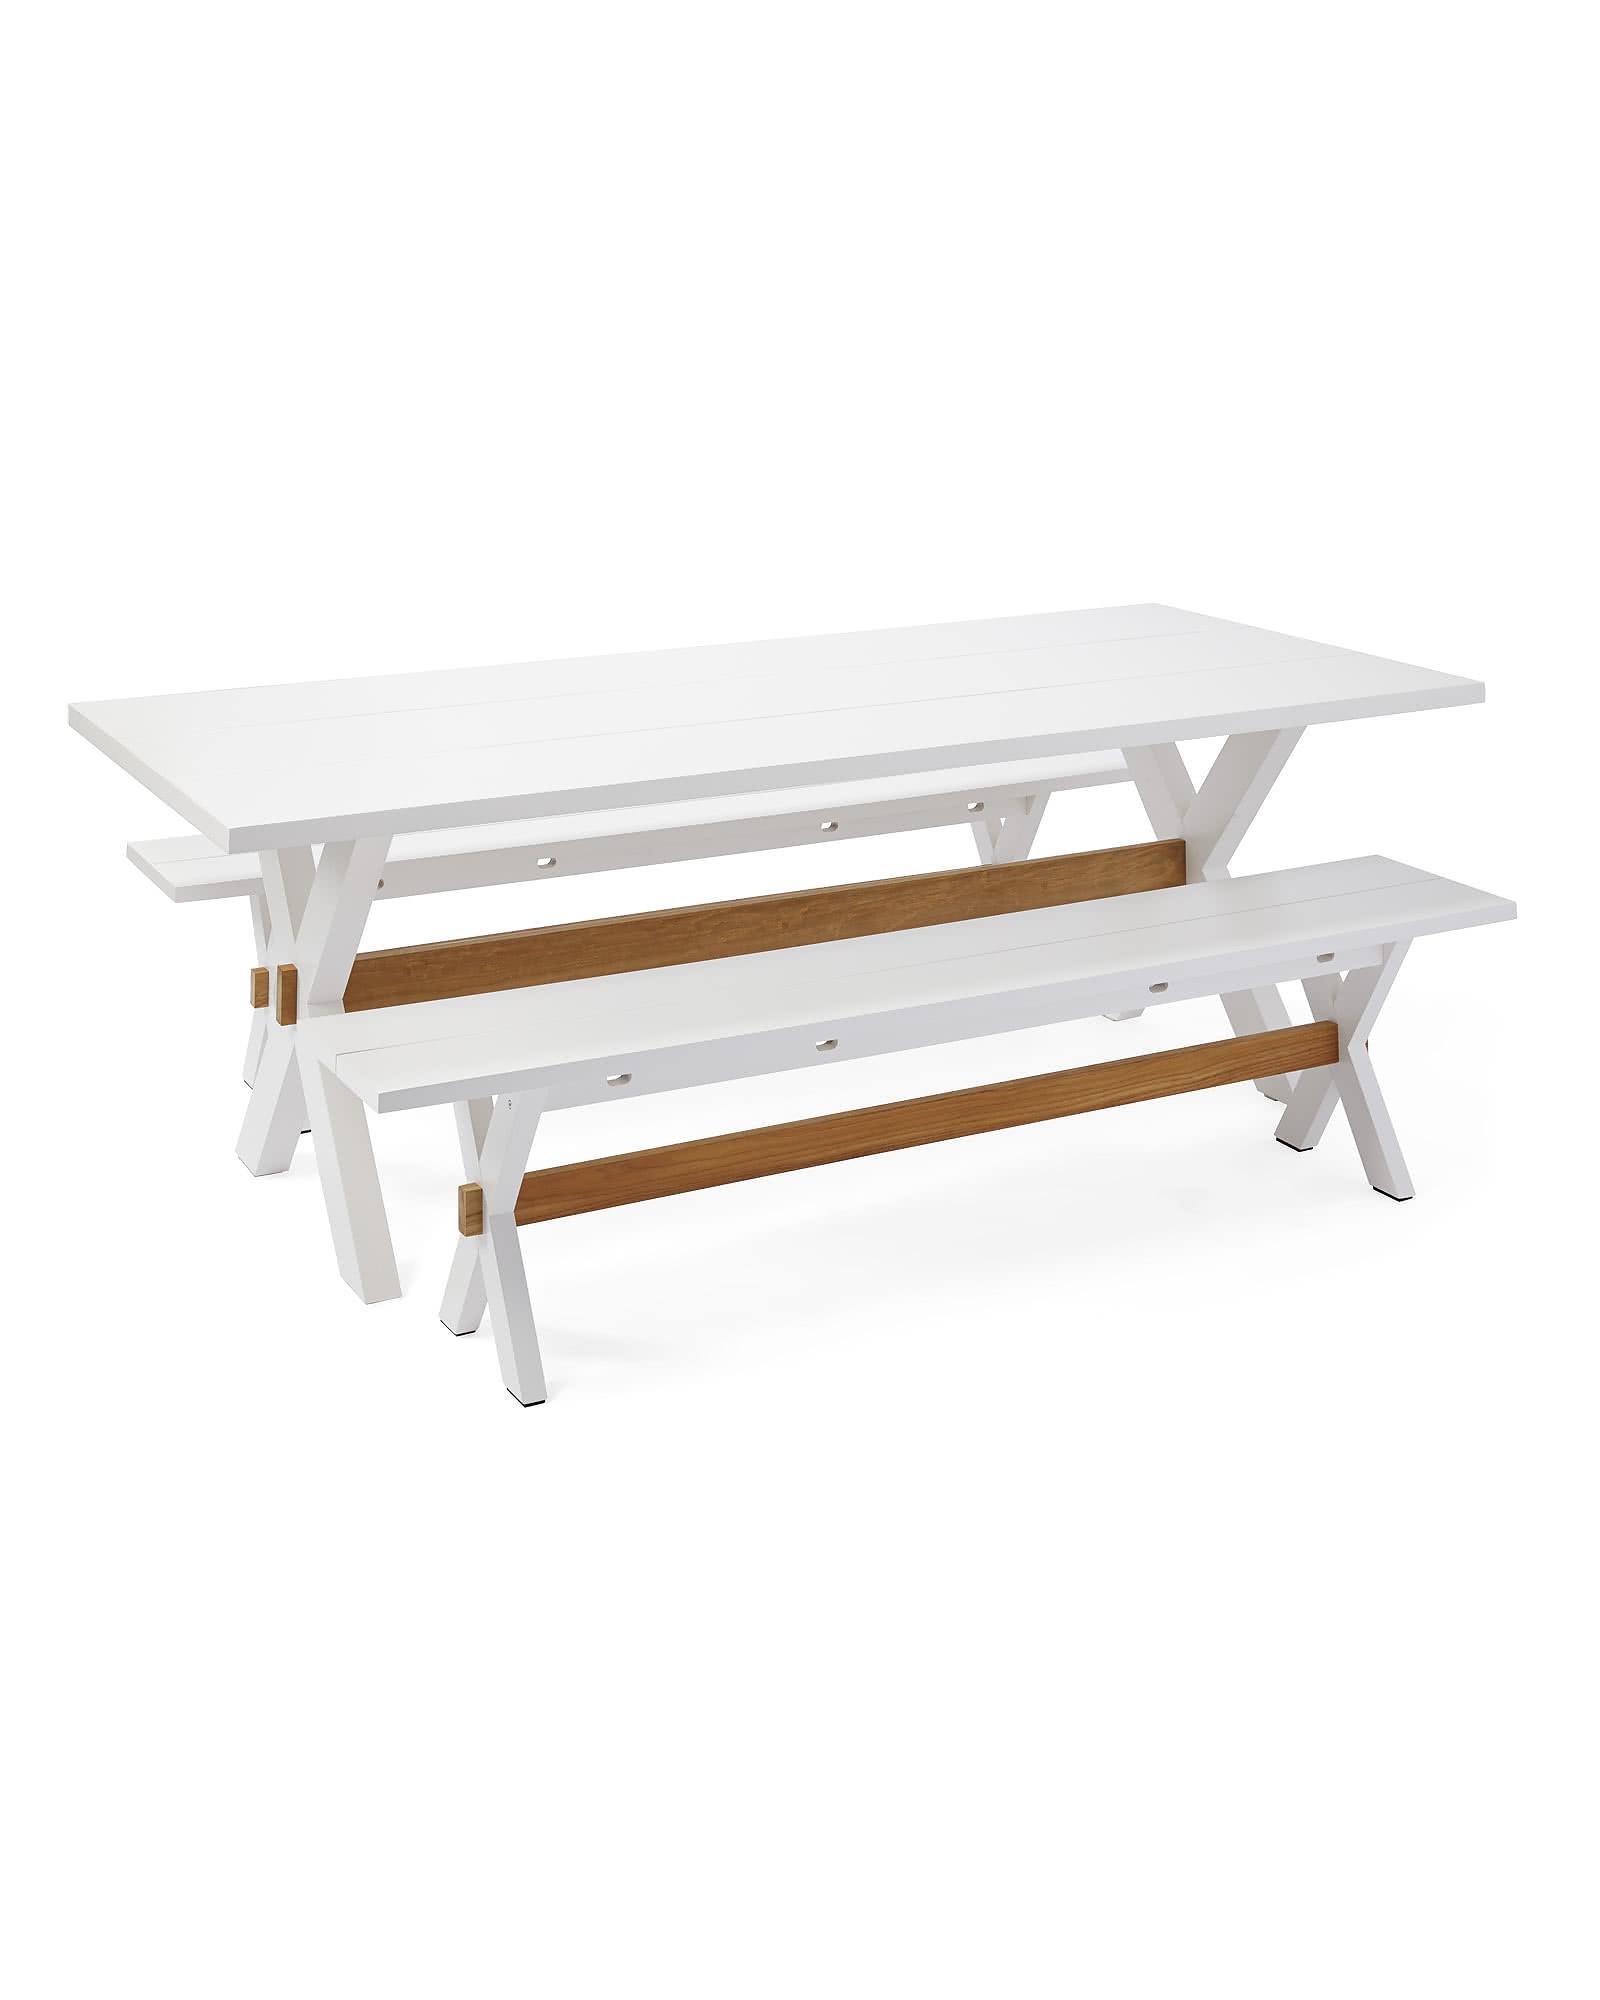 Furn_California_Dining_Table_White_Angle_With_Benches_COMPOSITE_MV_1514_Crop_SH